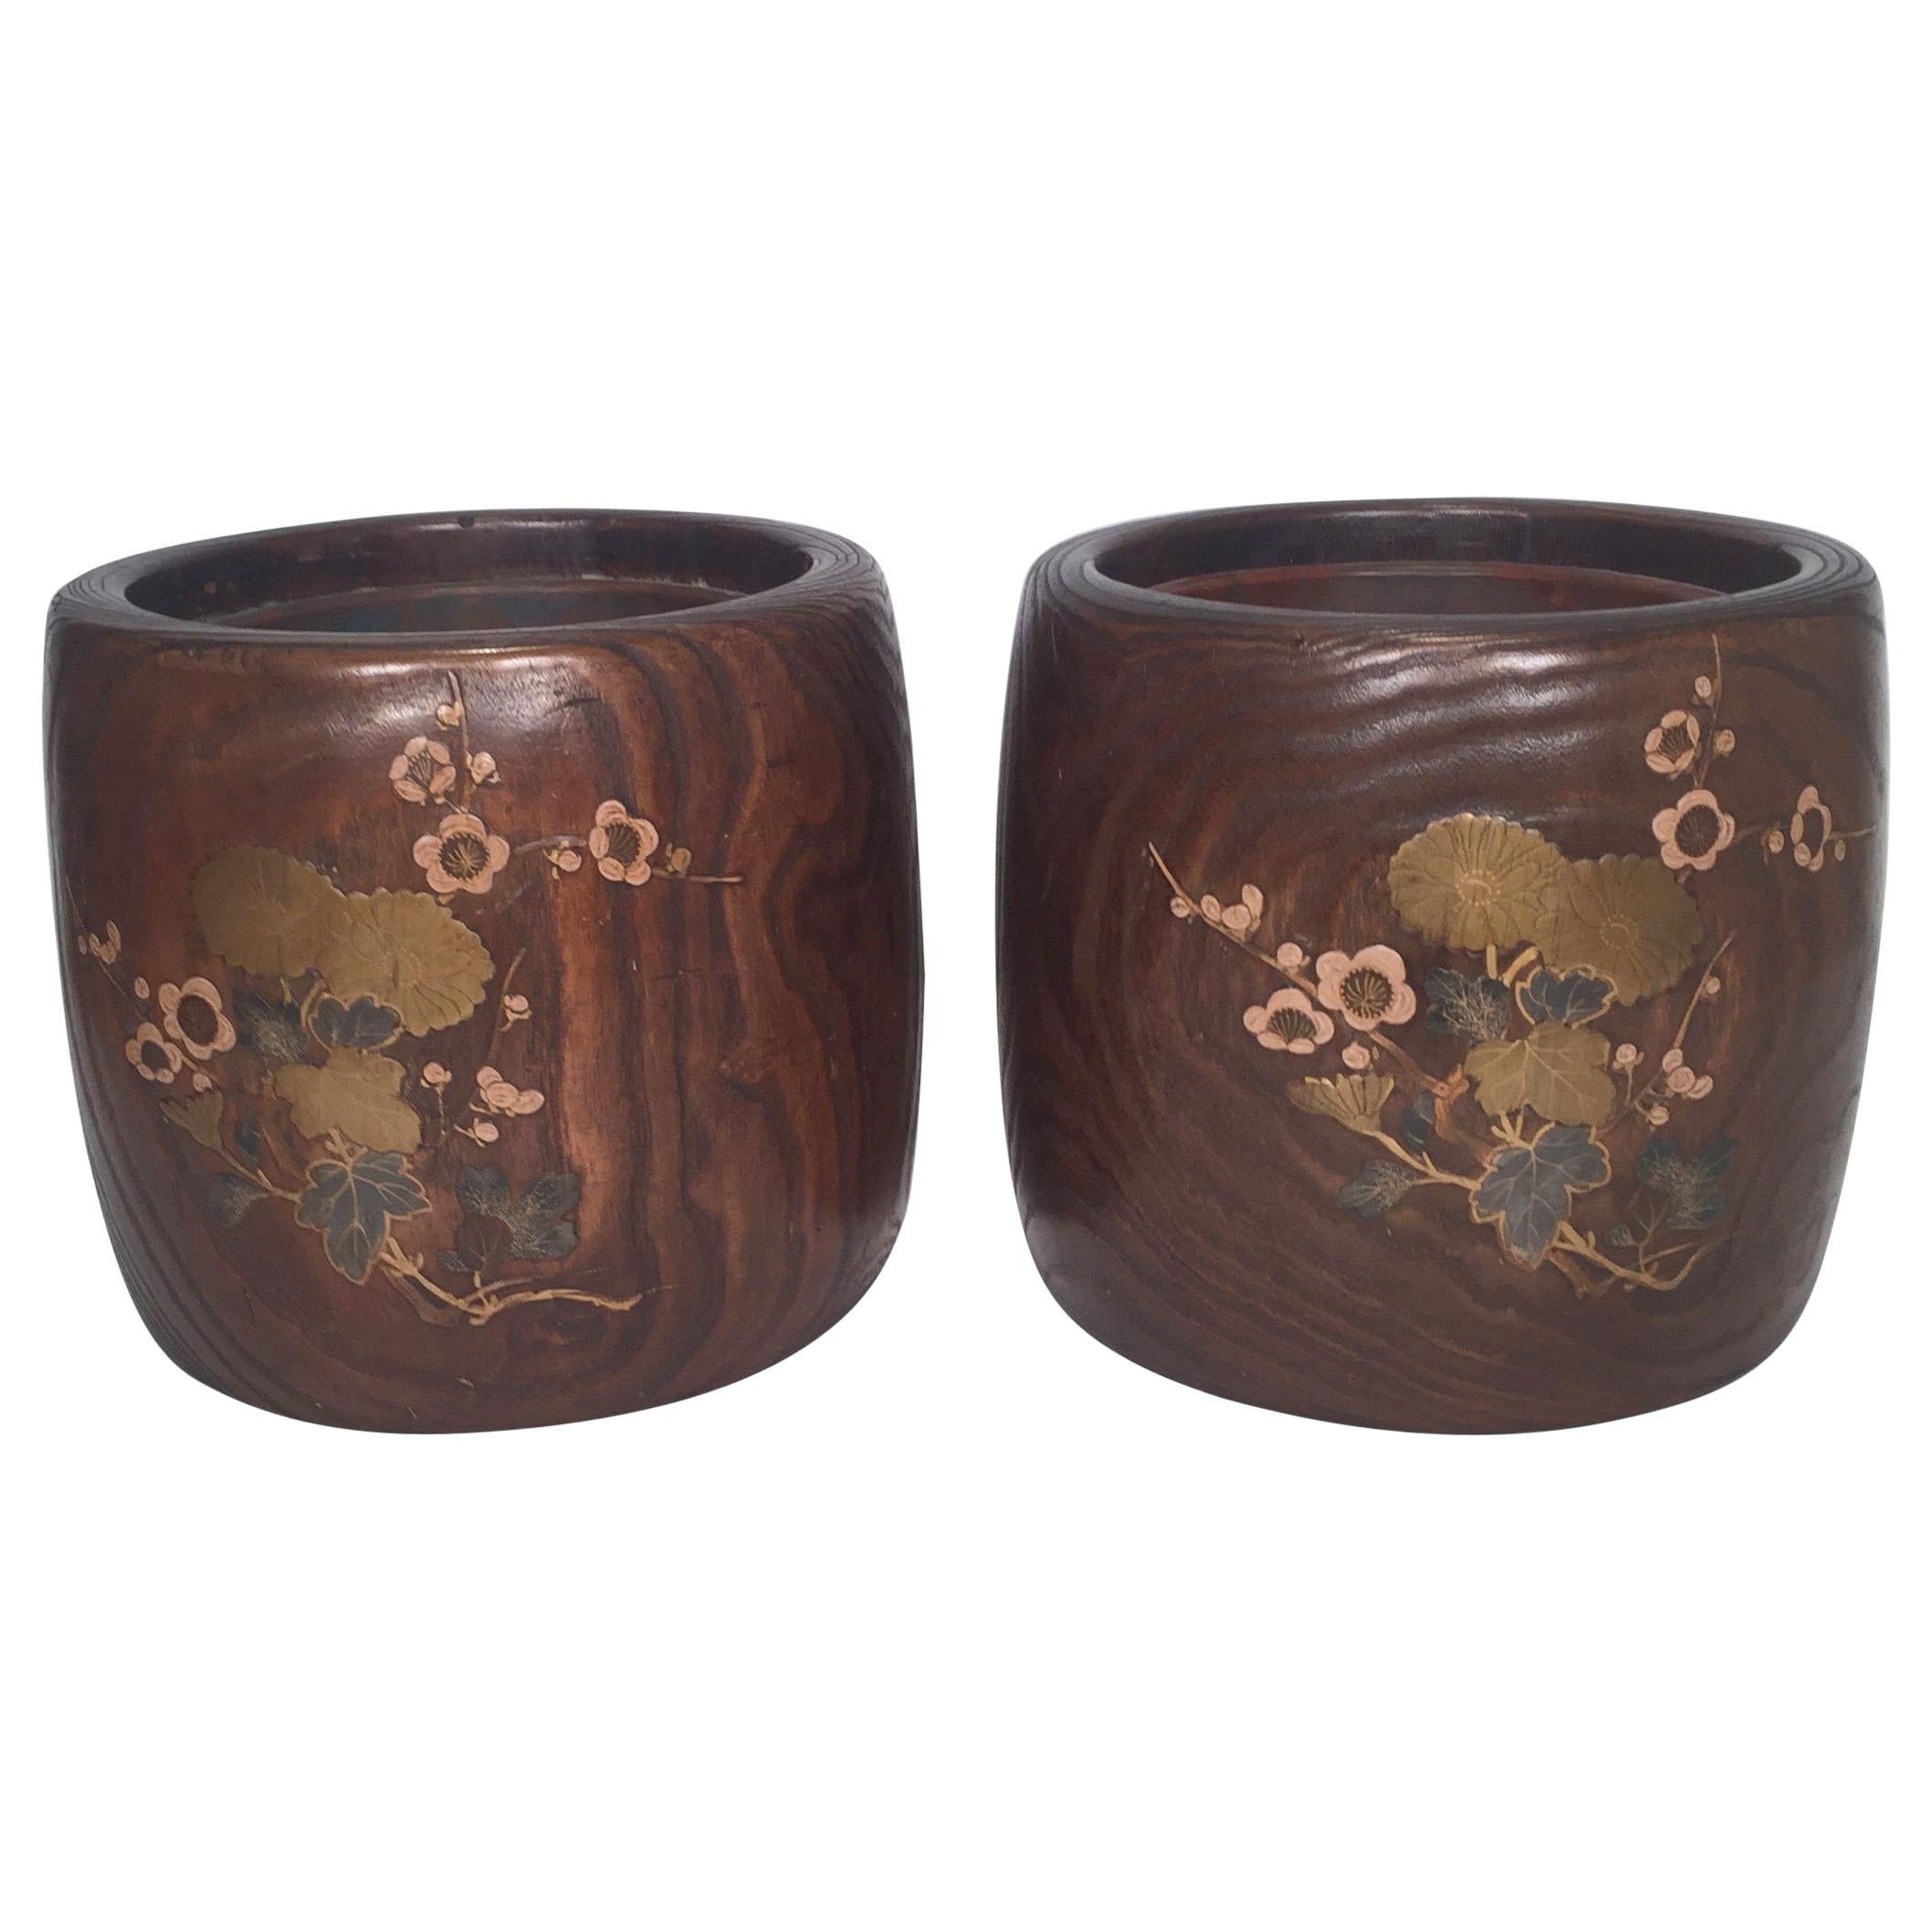 Pair of 19th Century Japanese Wood and Lacquer Jardinière Planters